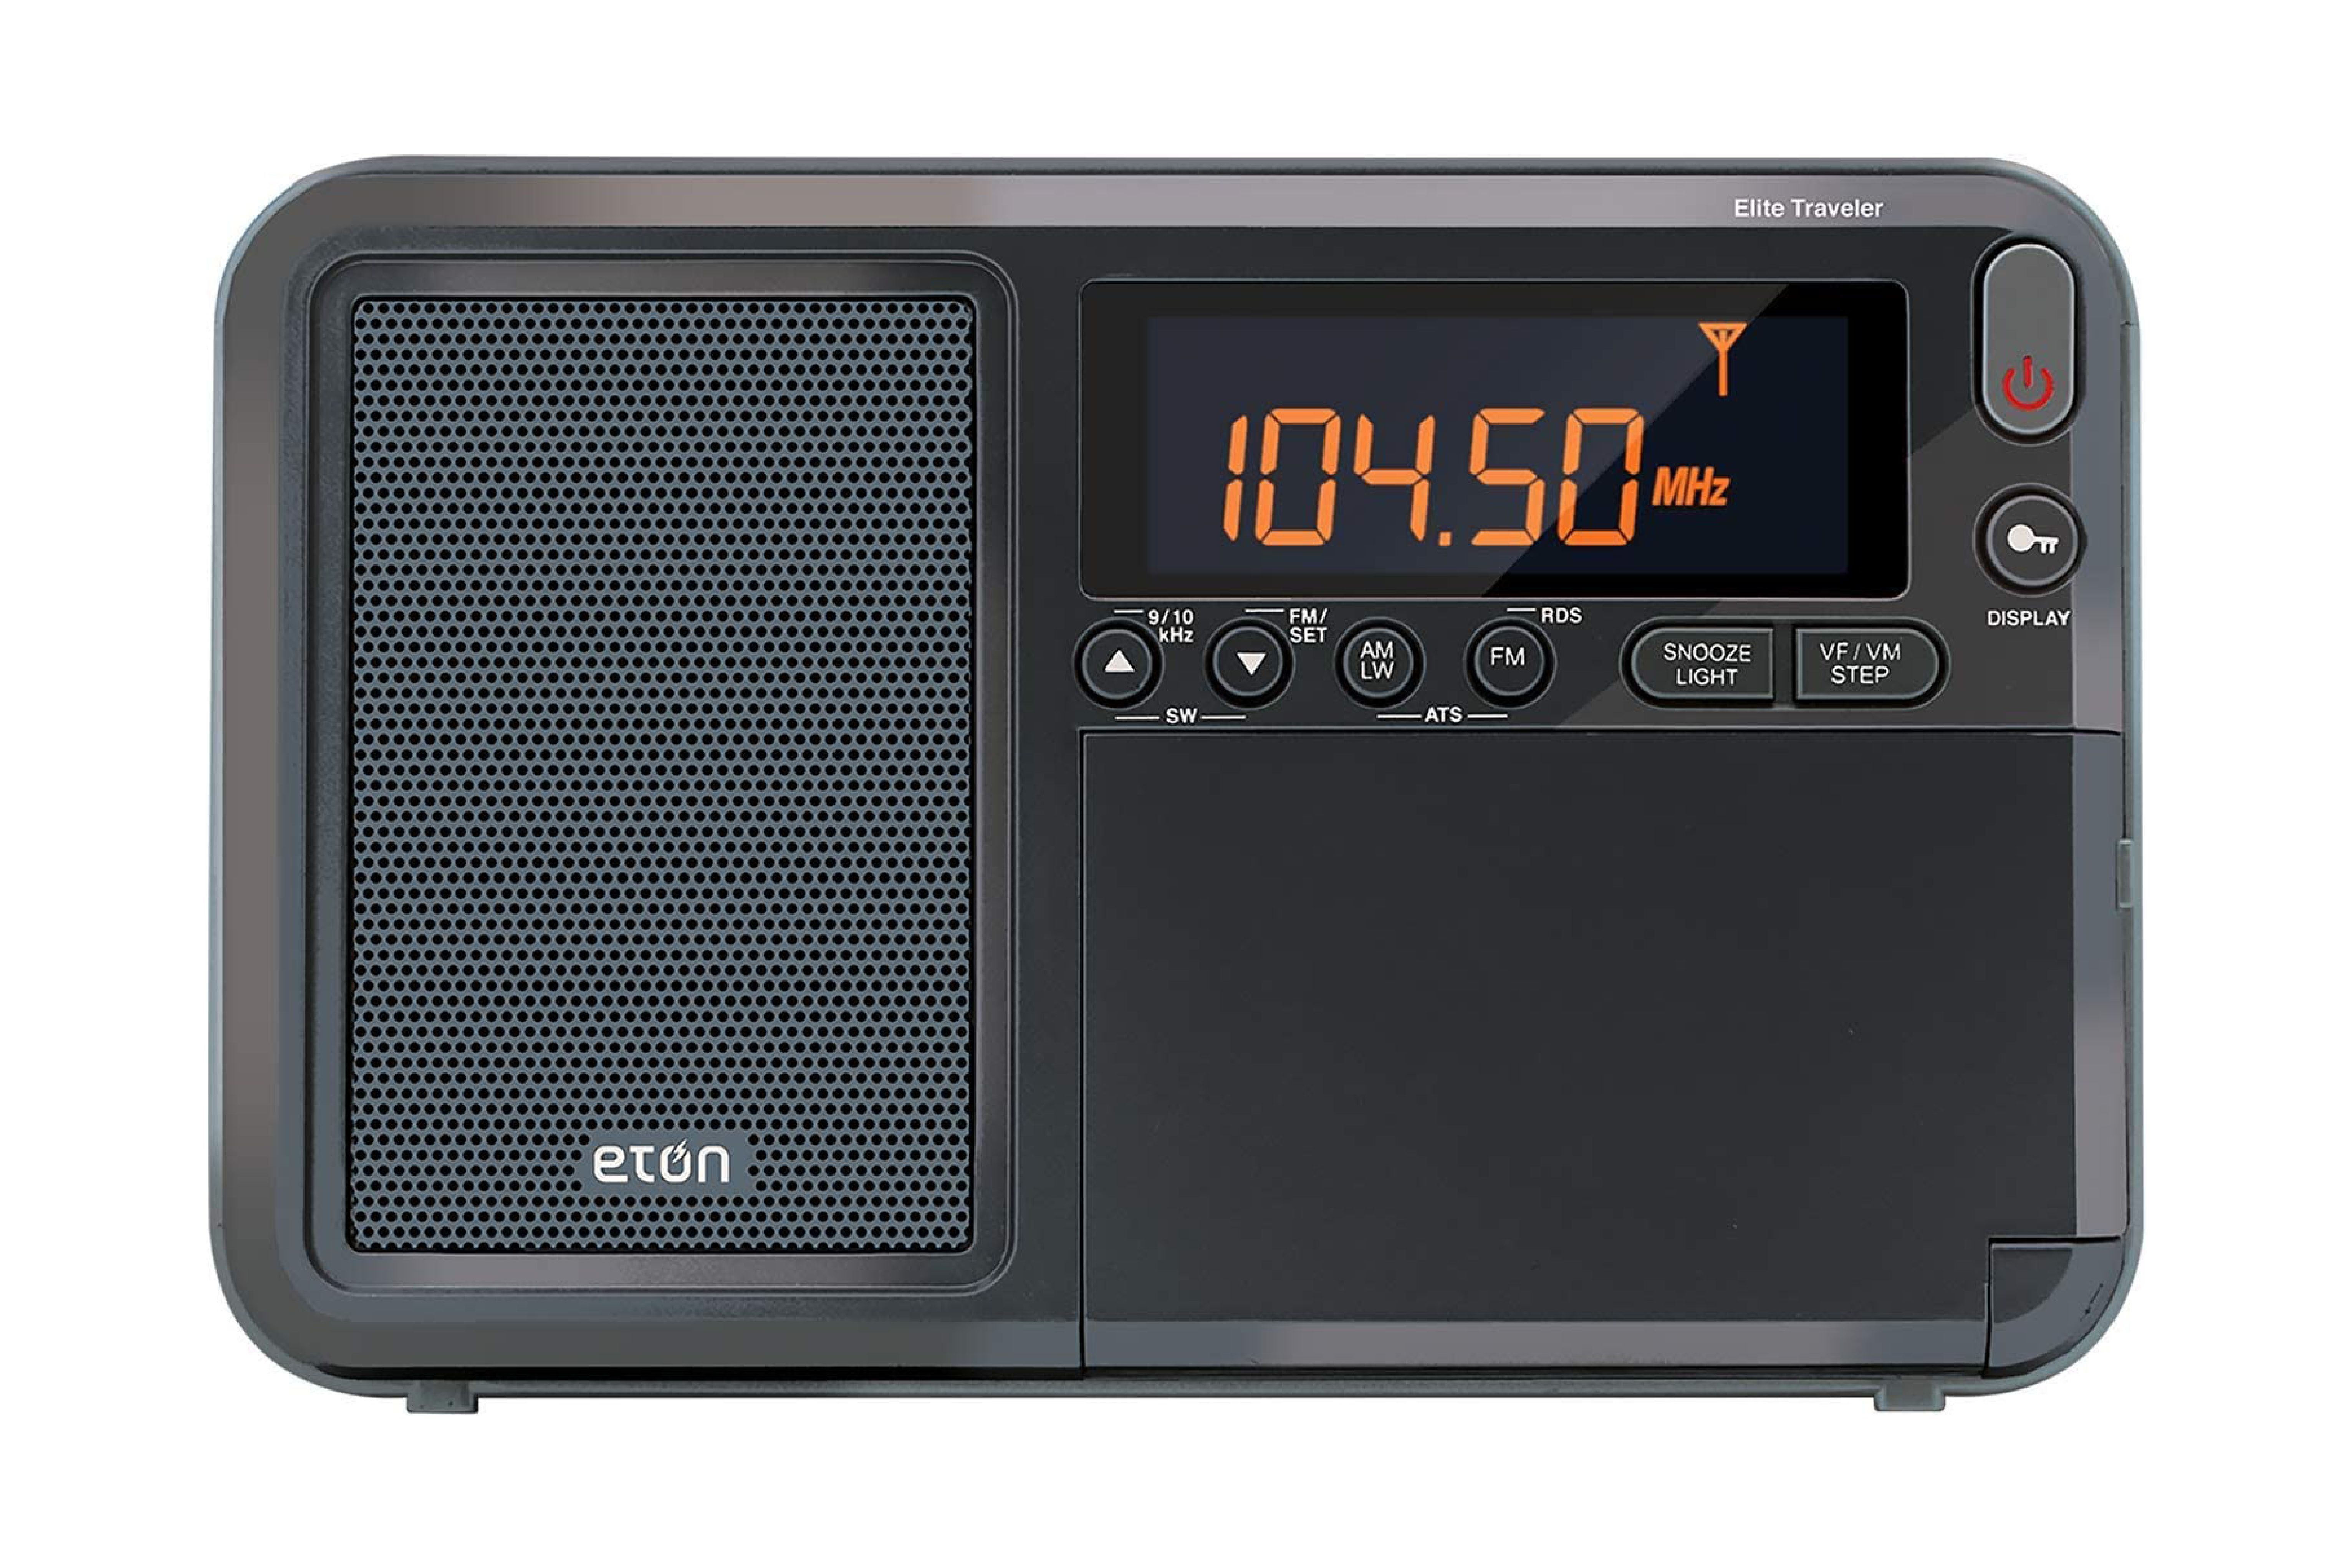 Portable AM FM Radio with LCD Display Digital AM FM Radio Plug in Wall Rechargeable USB Battery Operated Radio Small Portable Radios with Best Reception AM FM Battery Operated Kitchen Radio 